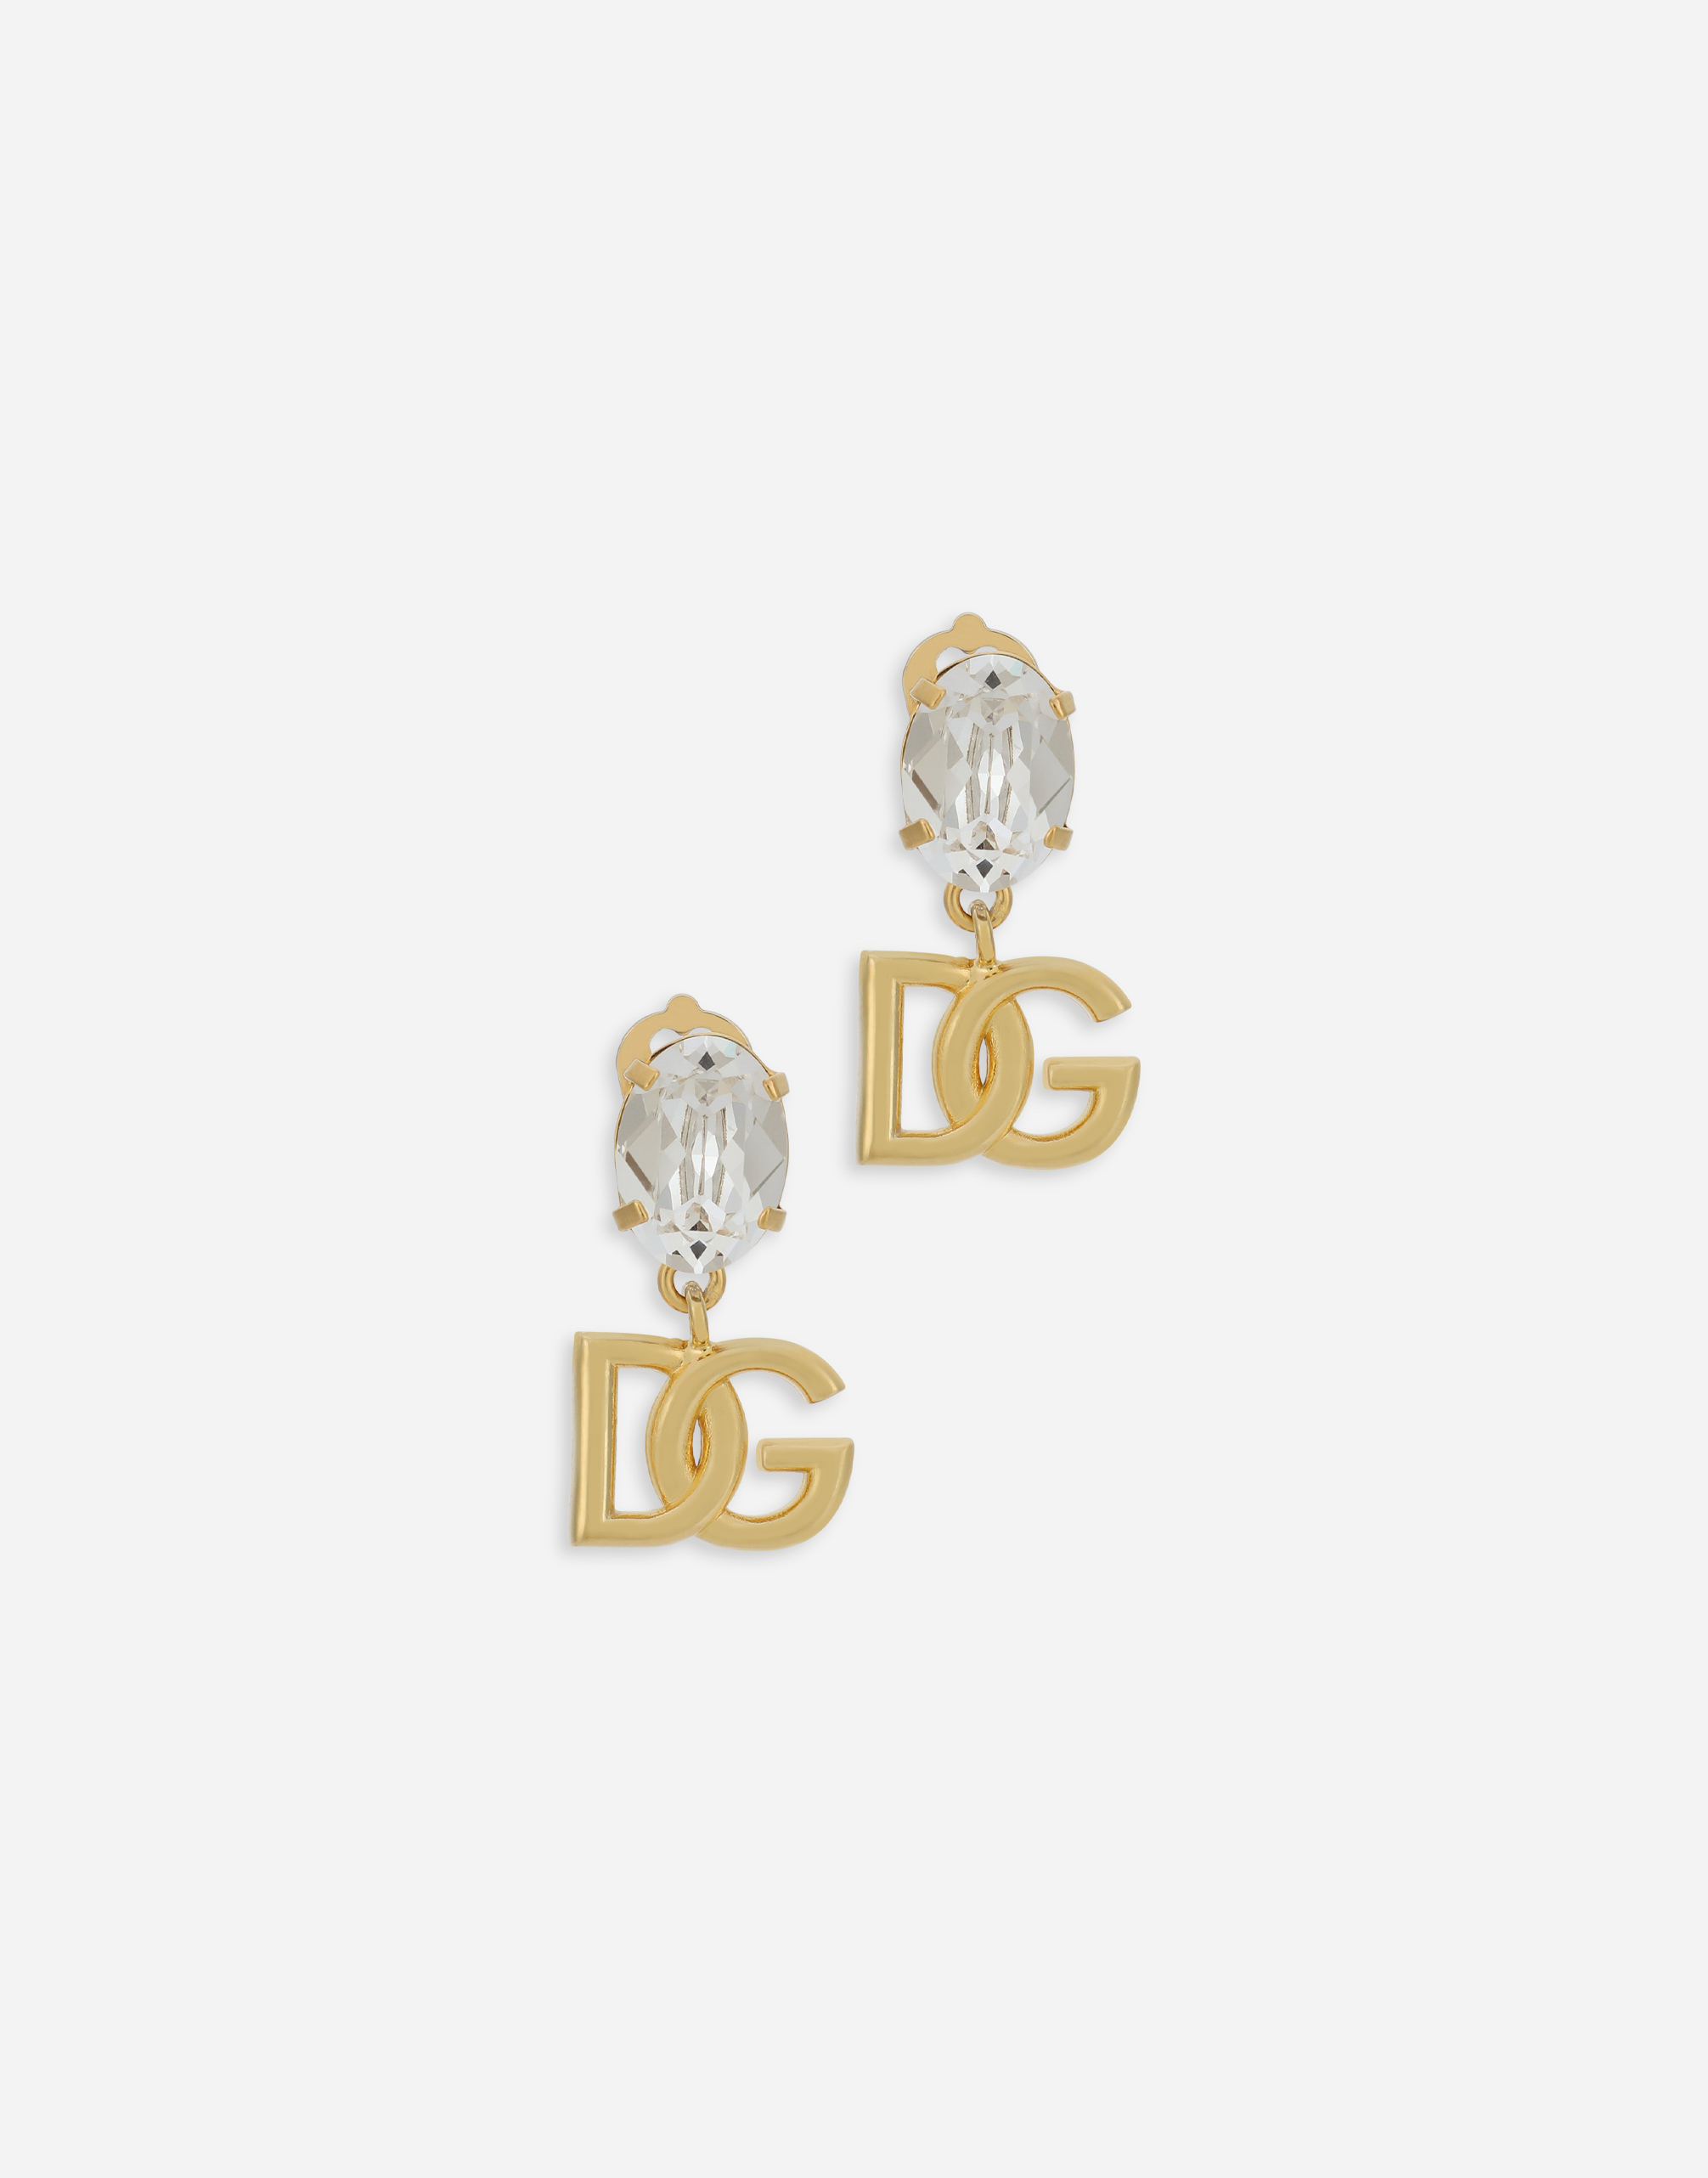 Earrings with rhinestones and DG logo in Gold